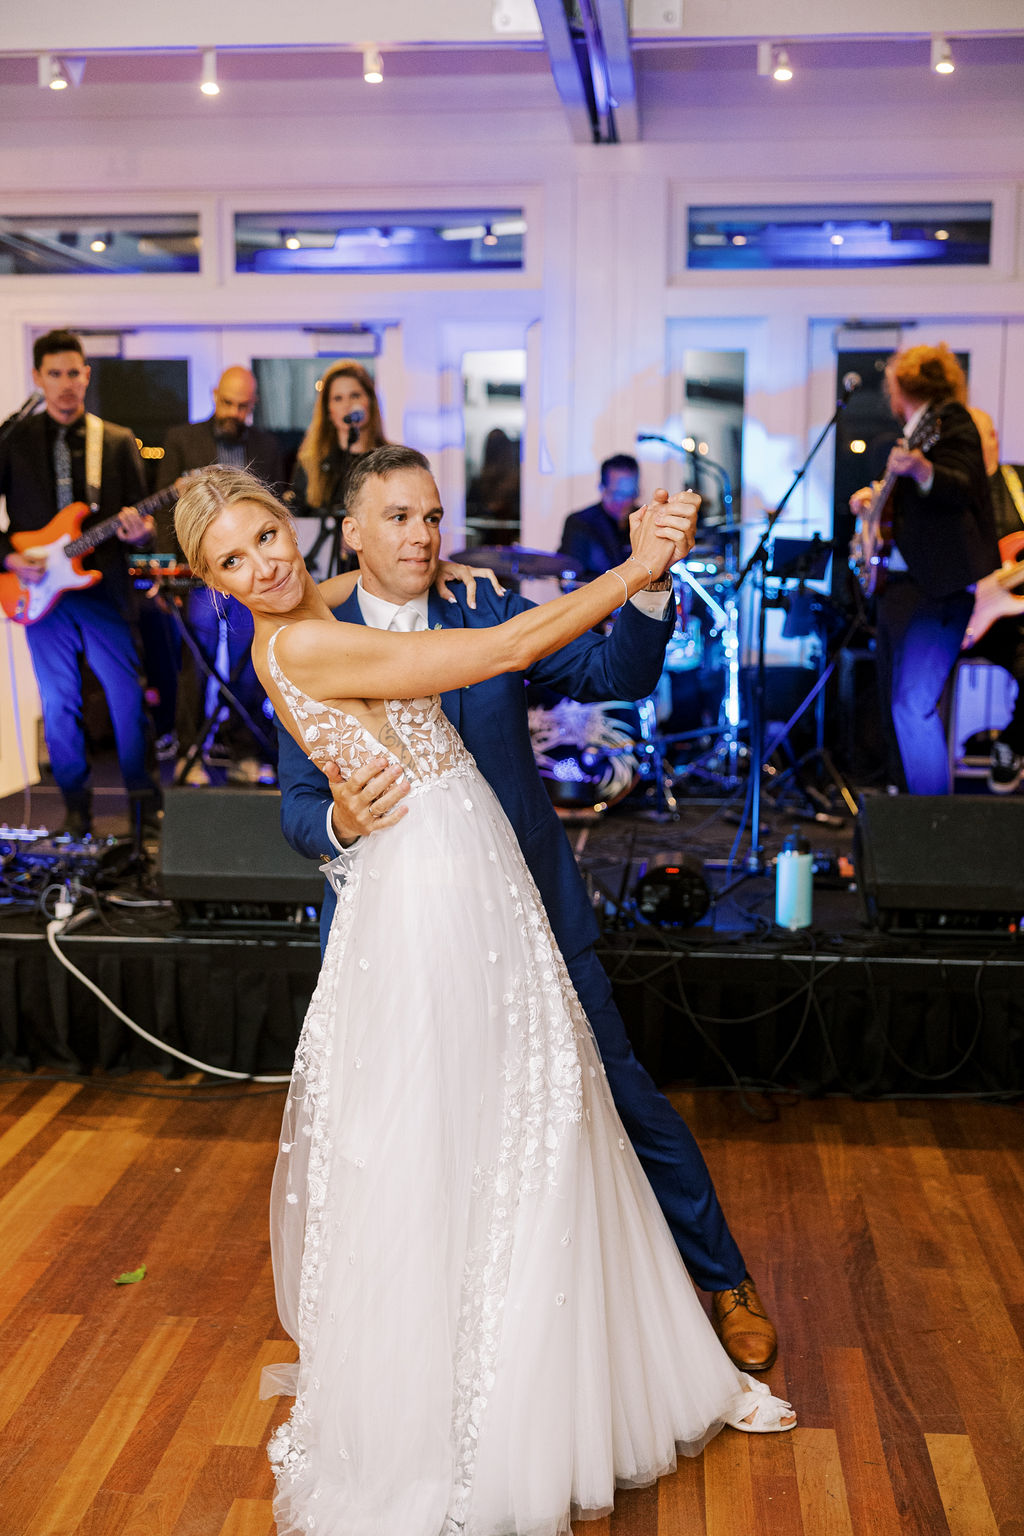 First dance to live music 